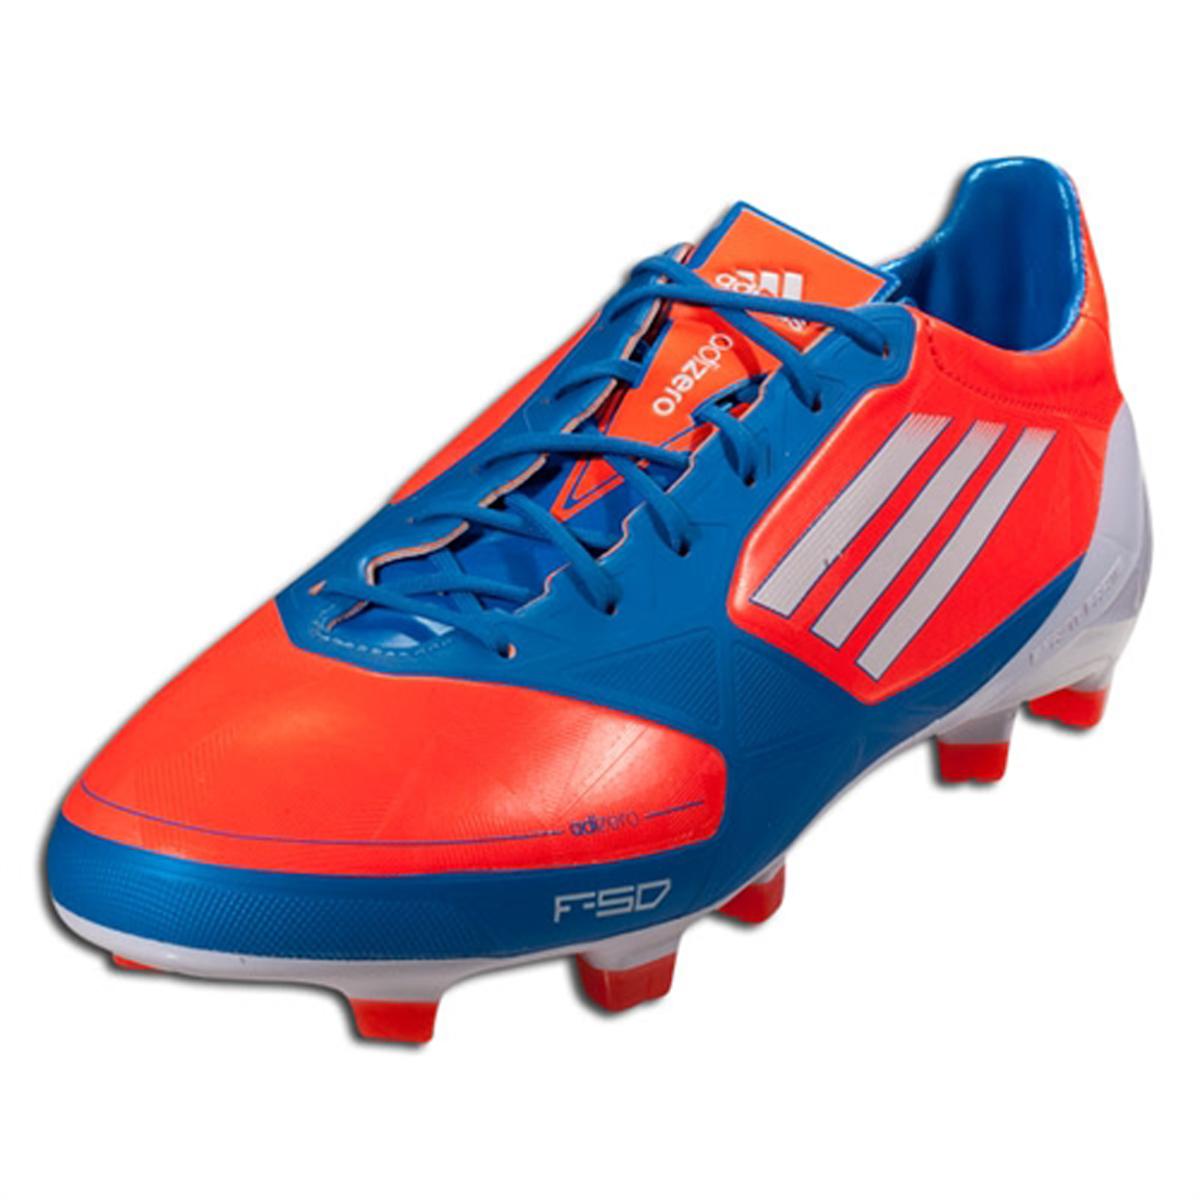 adidas f50 youth soccer cleats